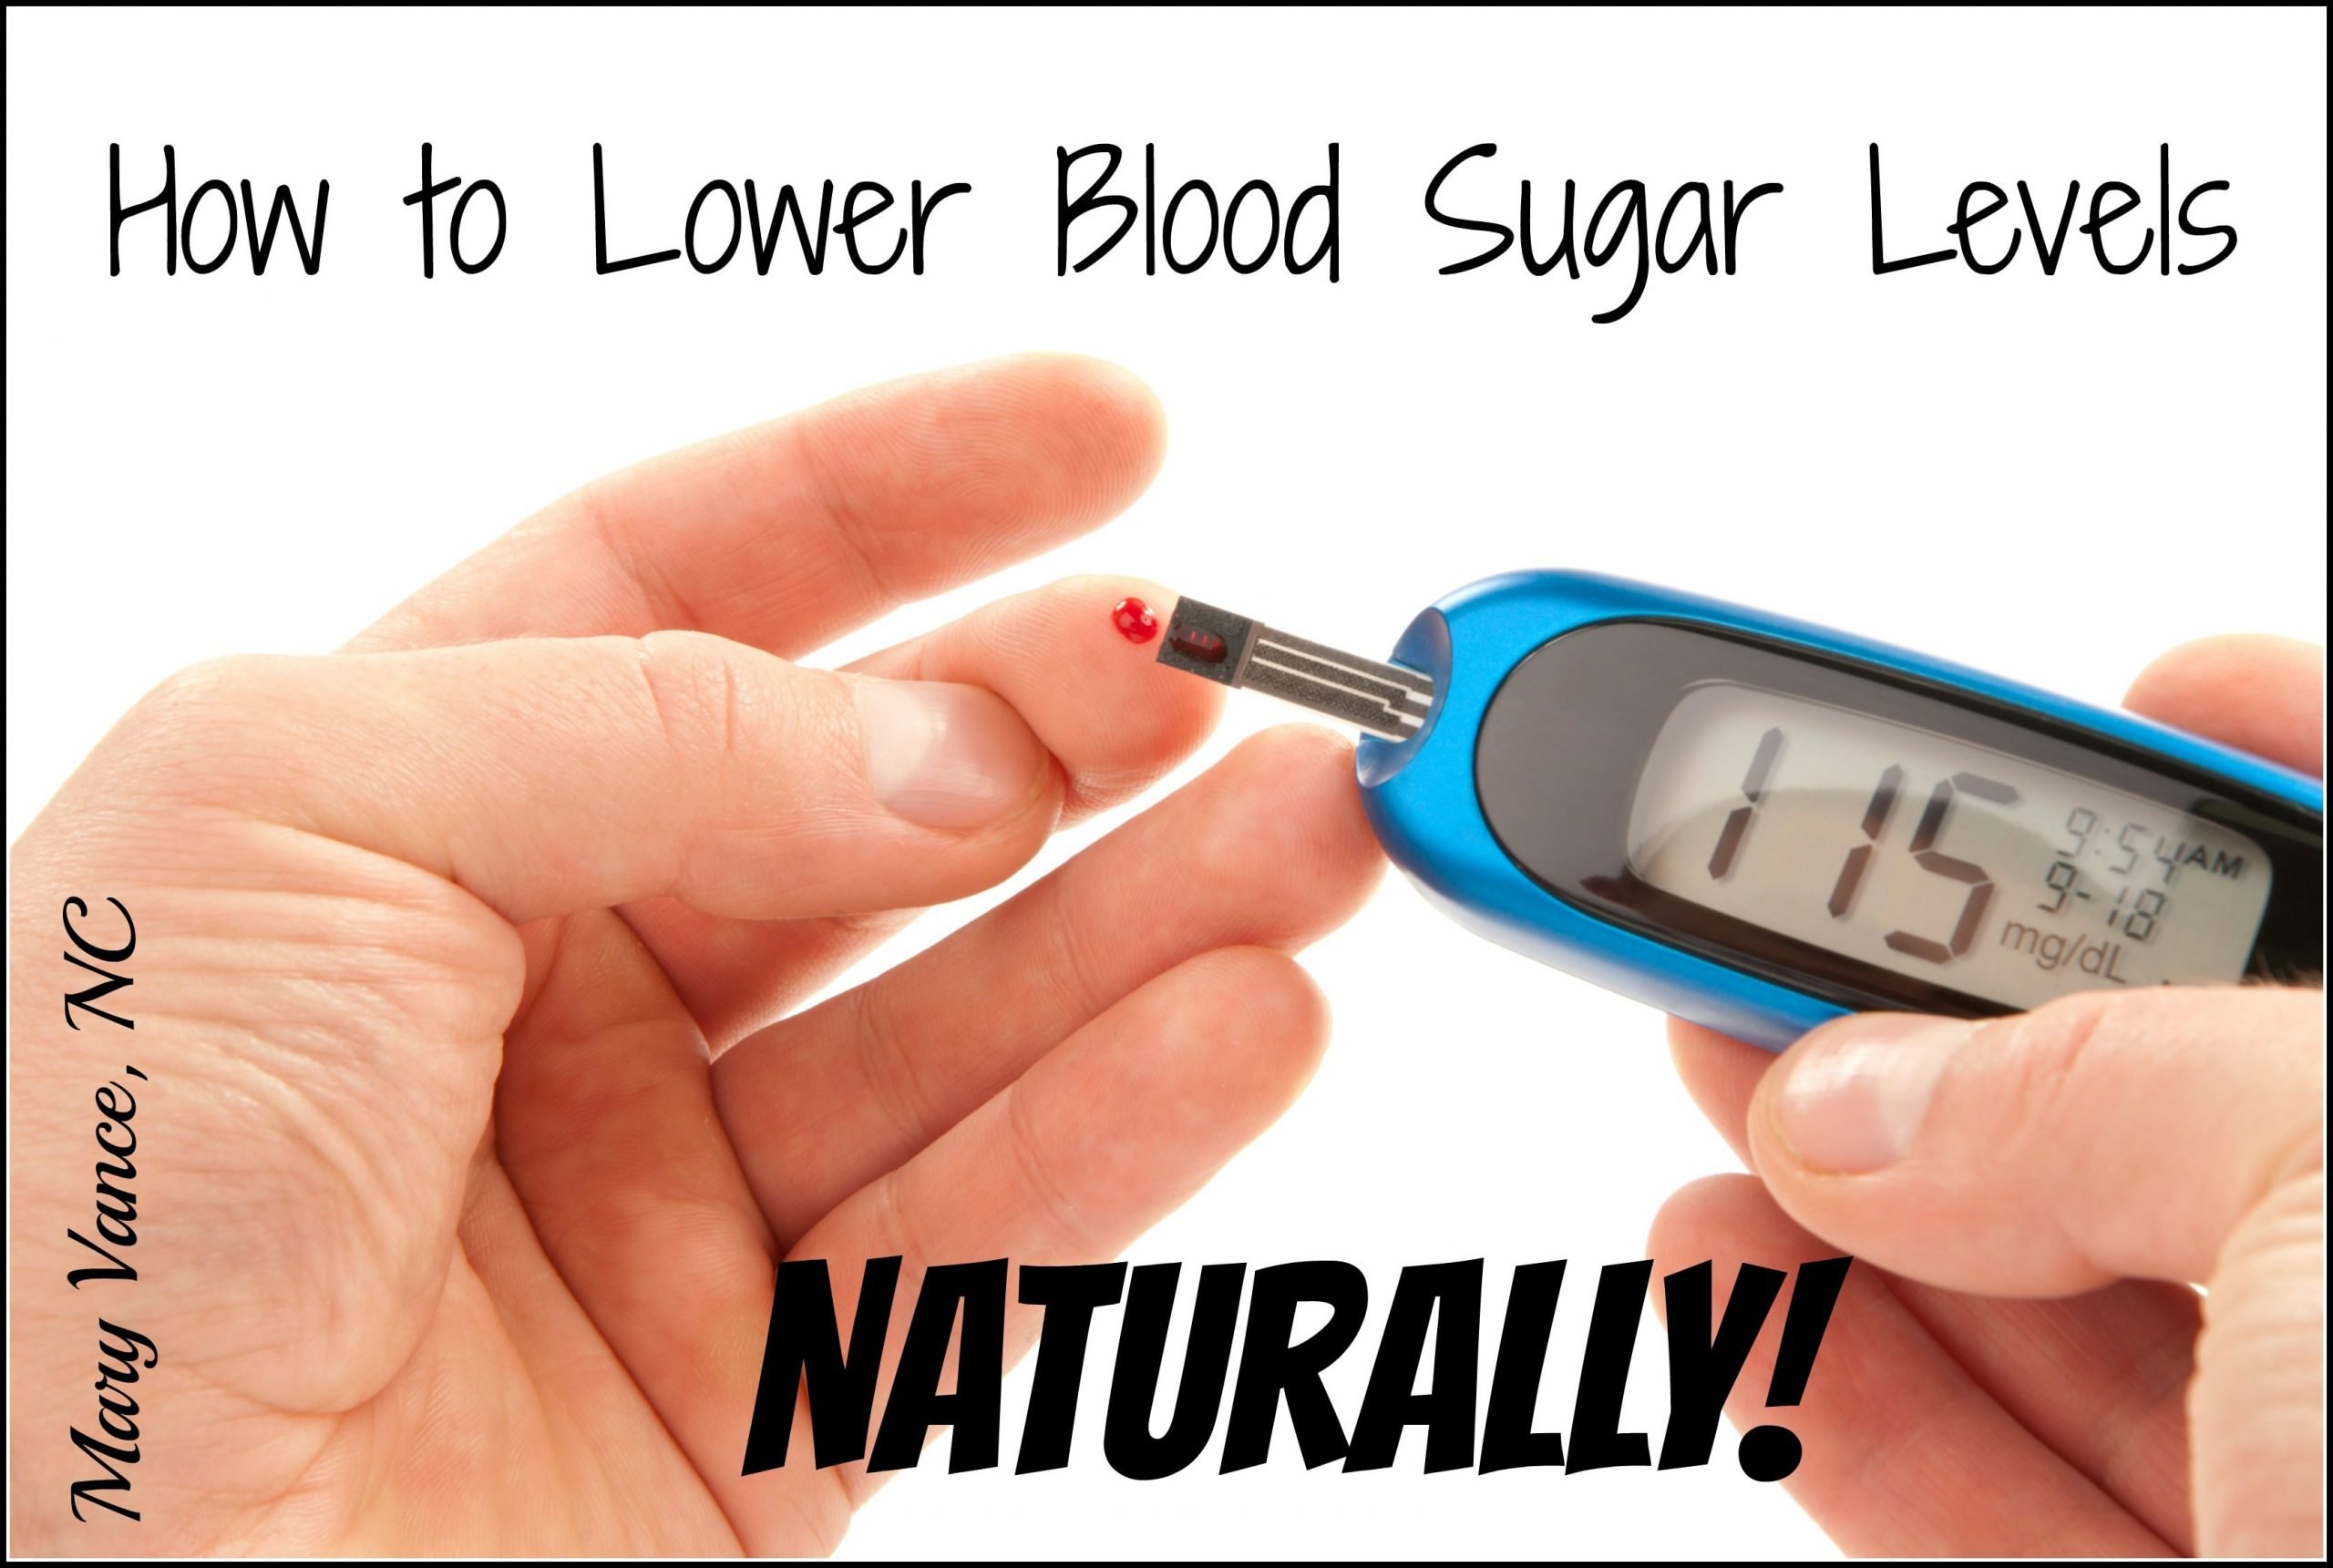 How to Lower Blood Sugar Levels Naturally